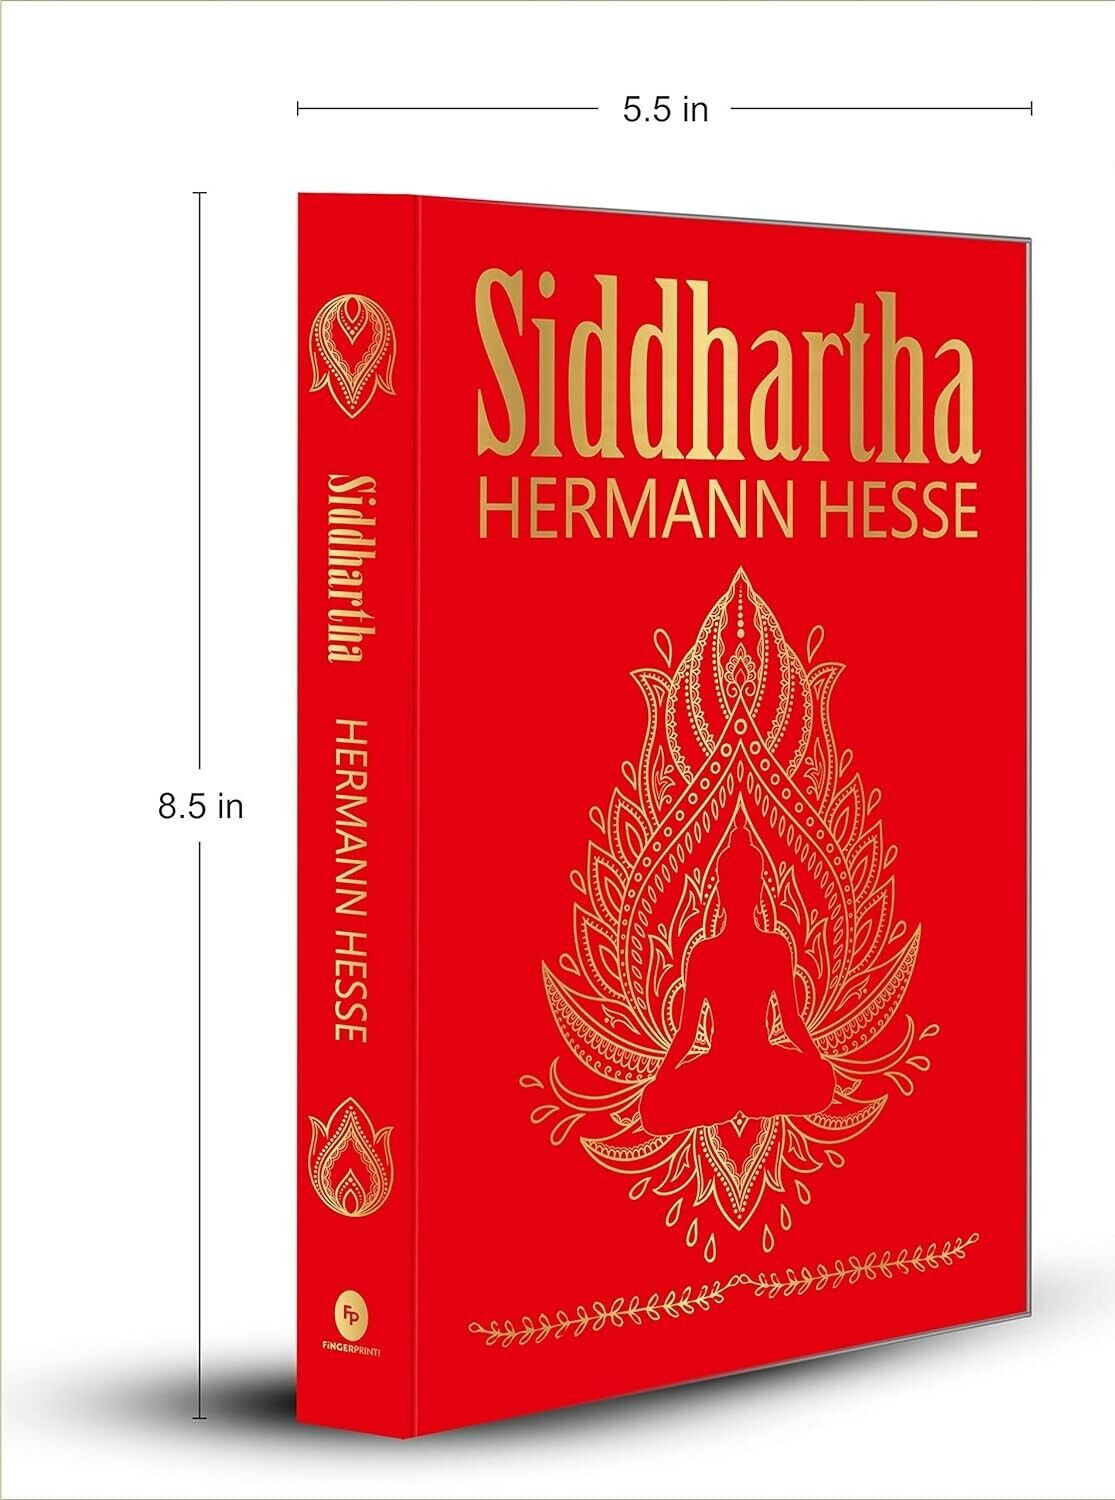 Siddhartha- DELUXE EDITION Hardcover, by Hermann Hesse, English Book, 